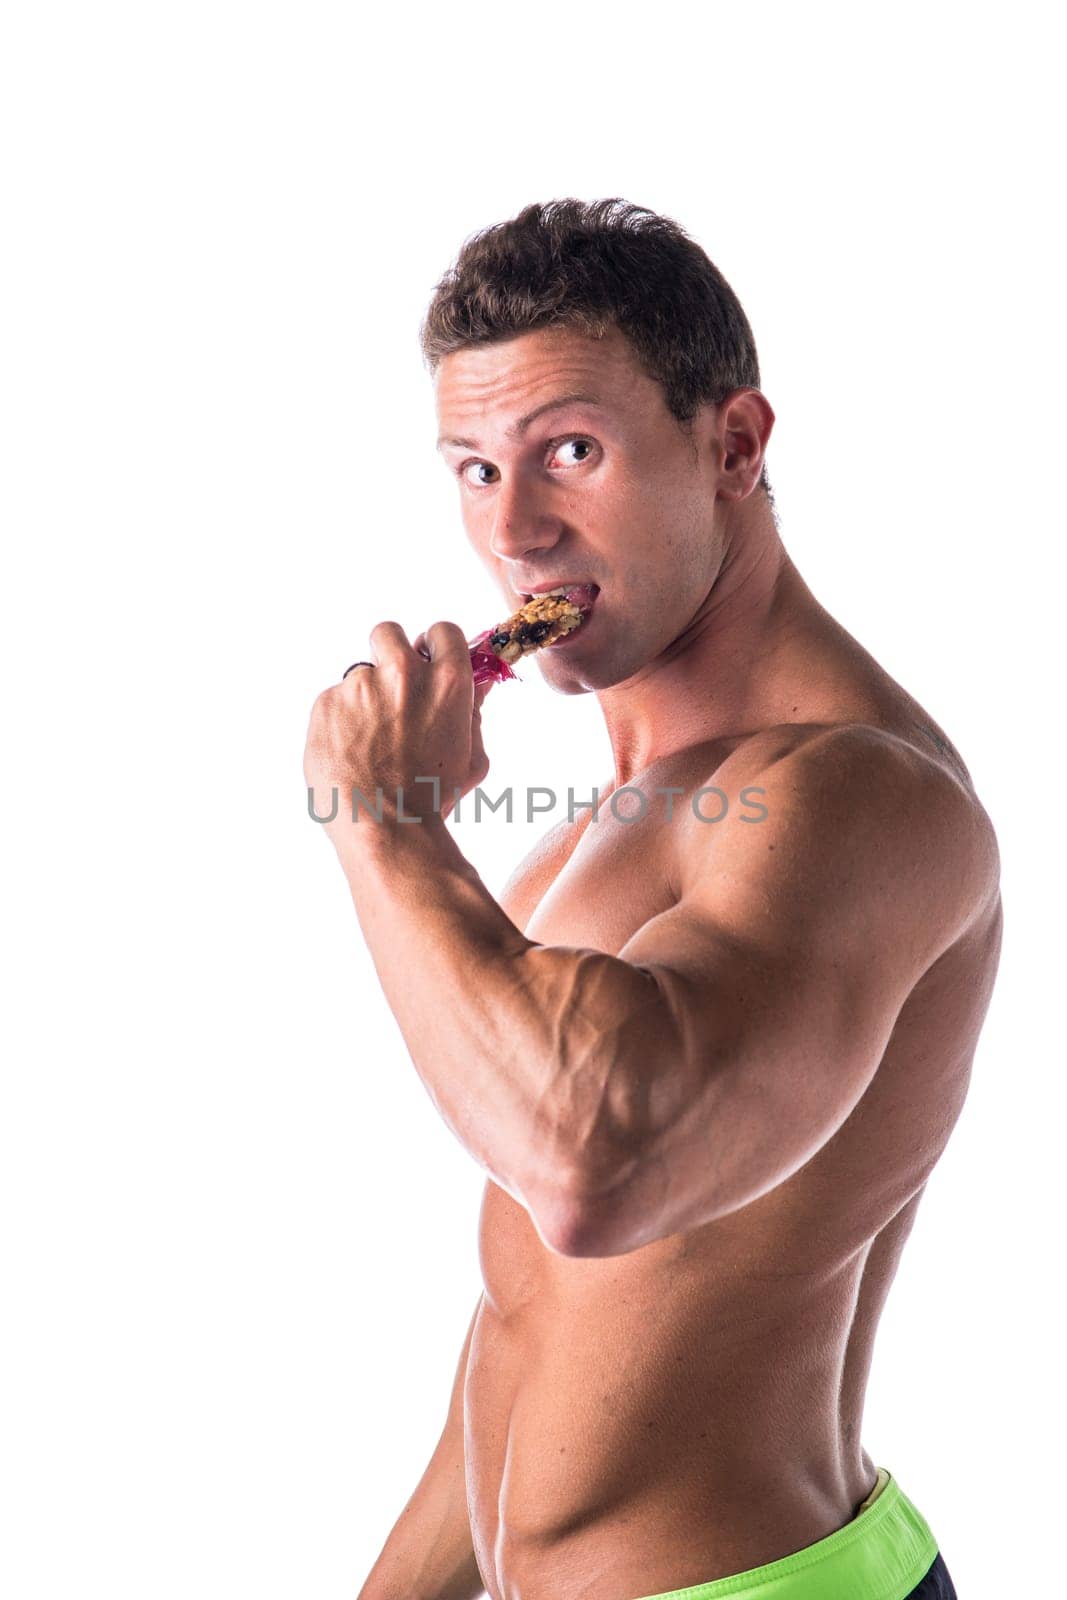 Handsome muscular shirtless man eating protein bar by artofphoto